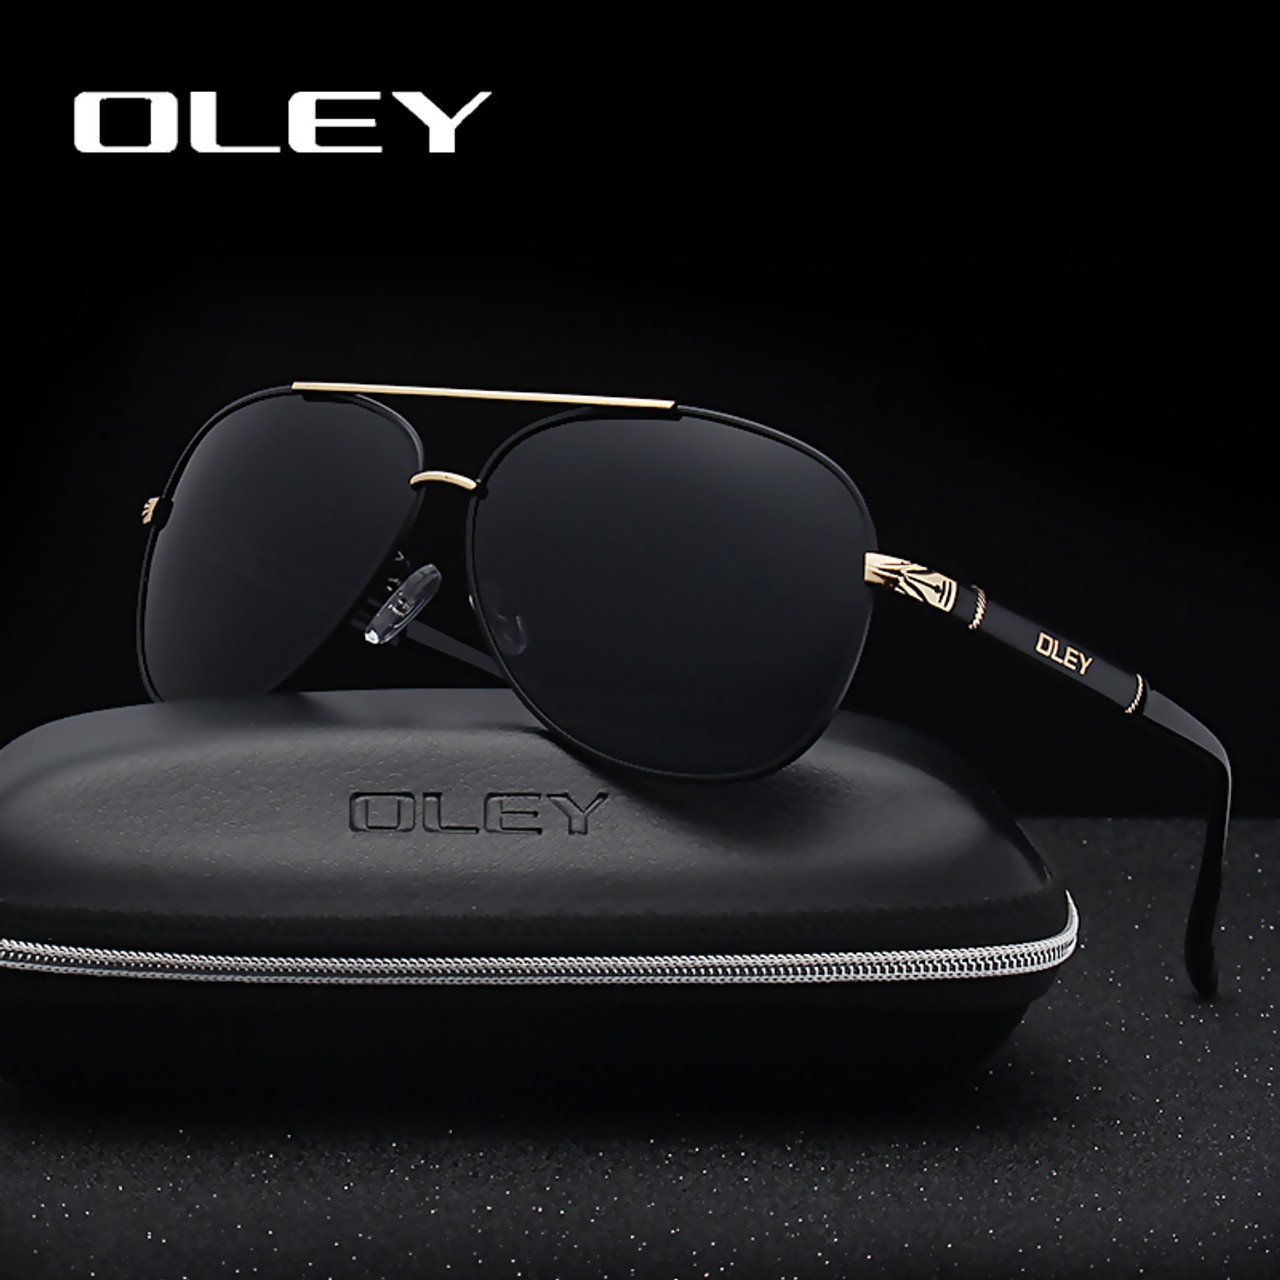 Oley Brand Sunglasses Men Polarized Fashion Classic Pilot Sun Glasses Fishing Driving Goggles Shades For Men Wome Y7005 Onshopdeals Com